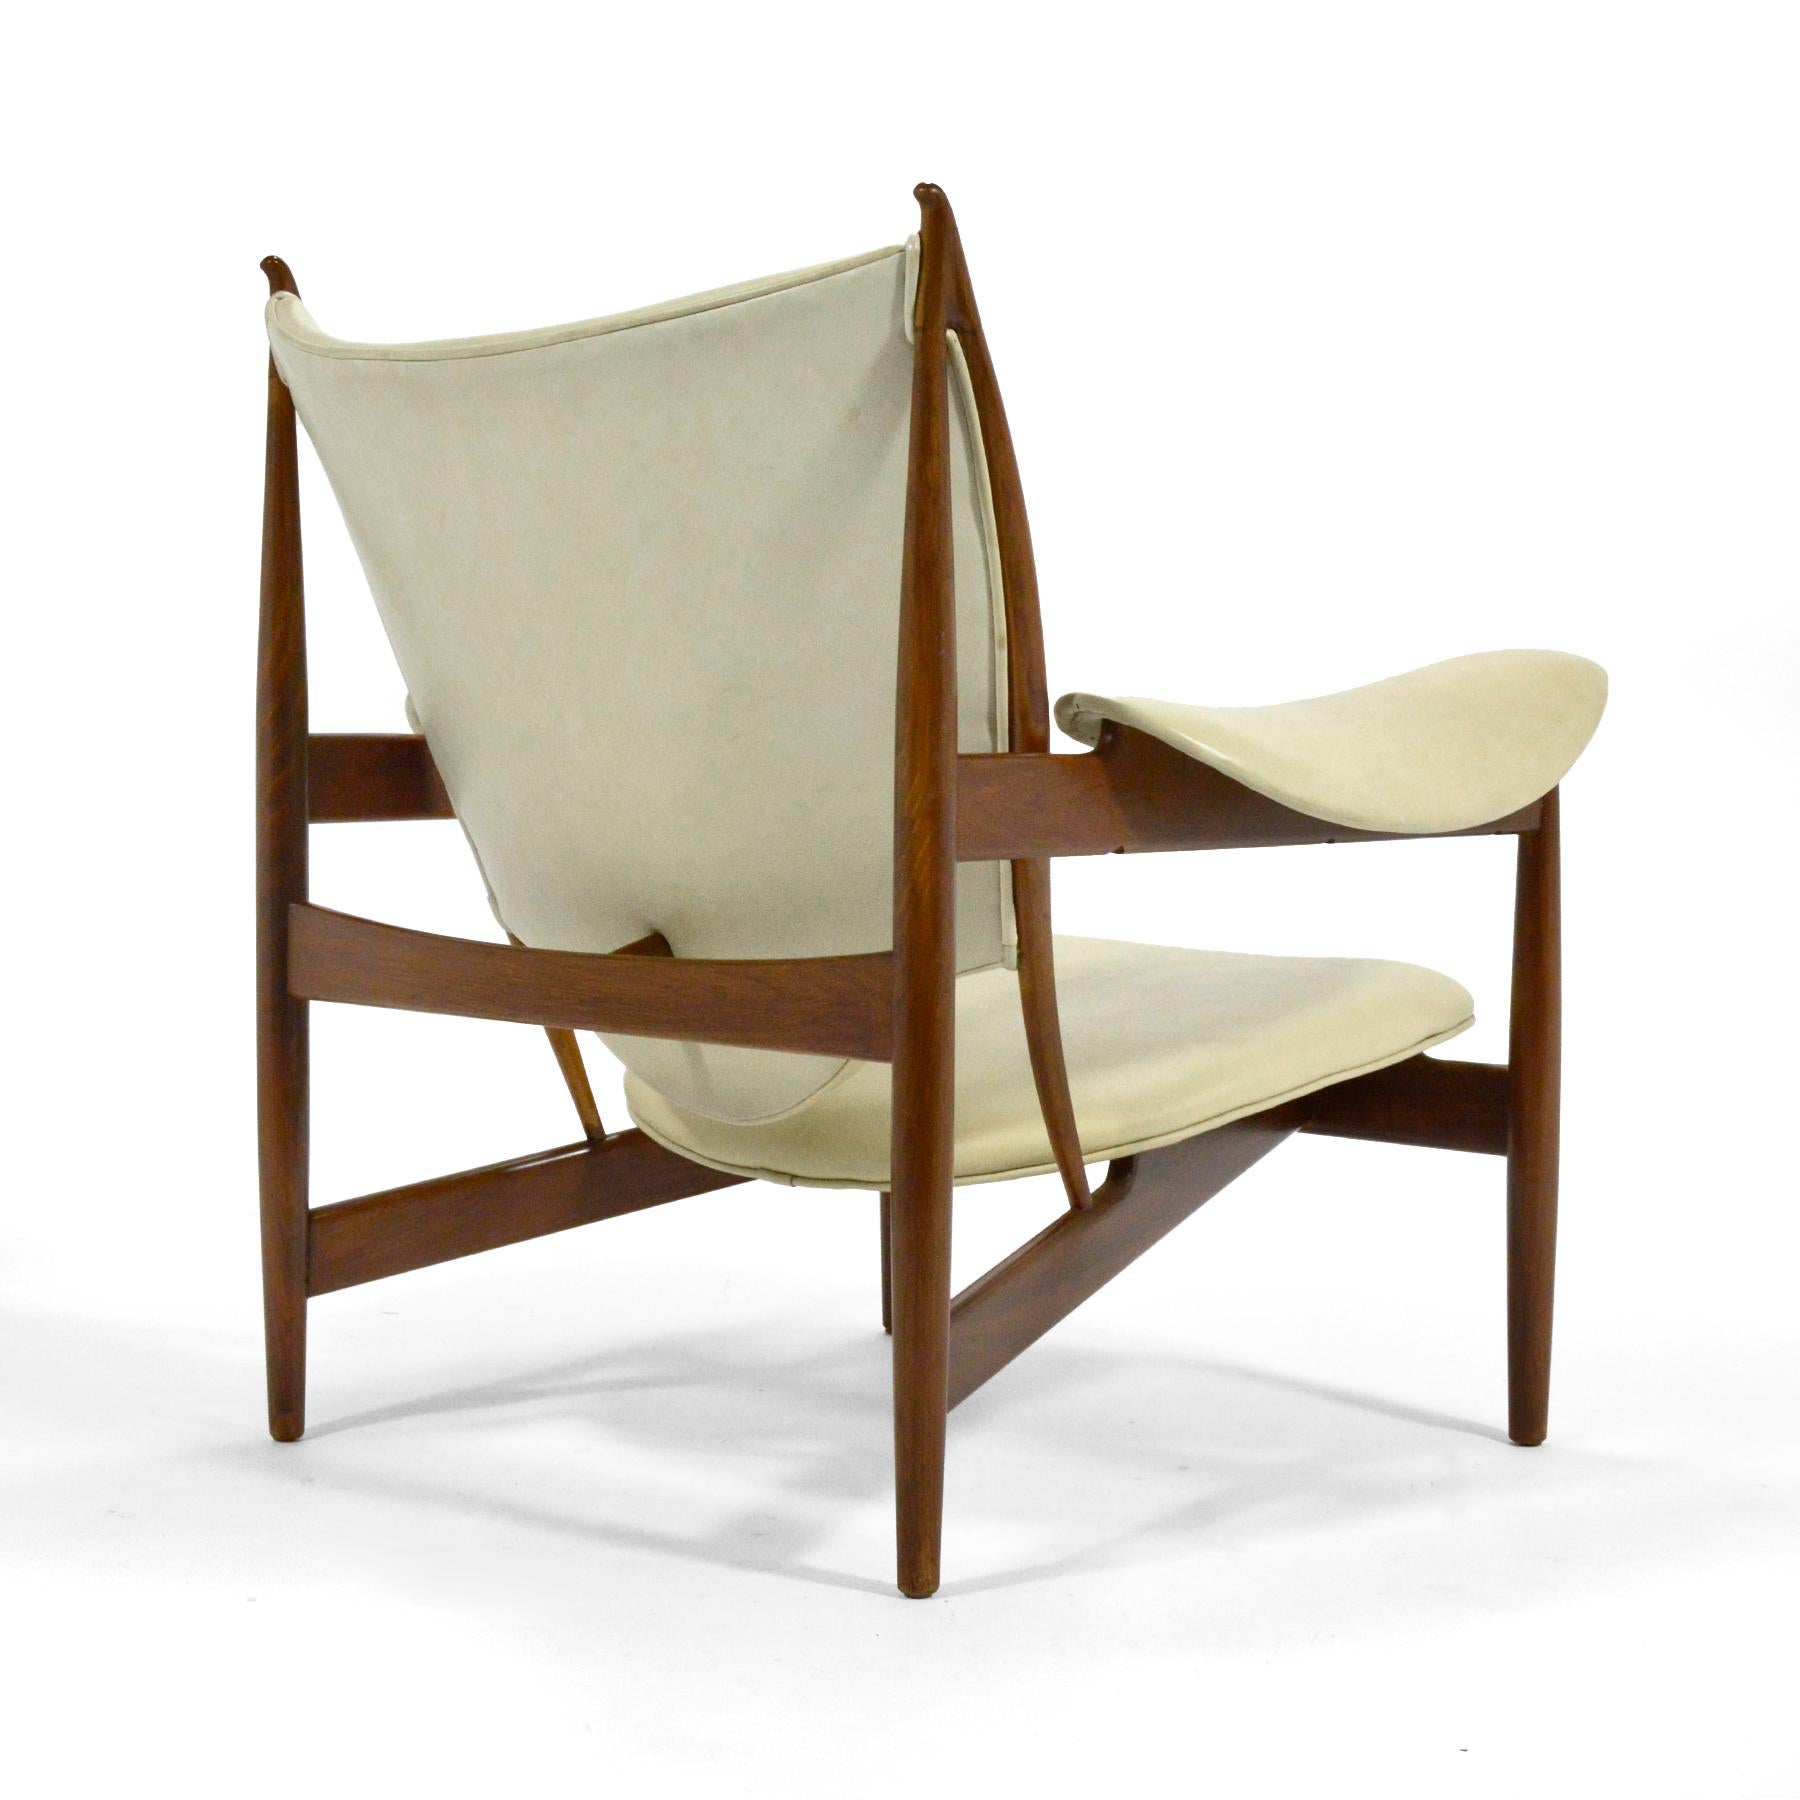 American Finn Juhl Pair of Chieftain Chairs by Baker For Sale